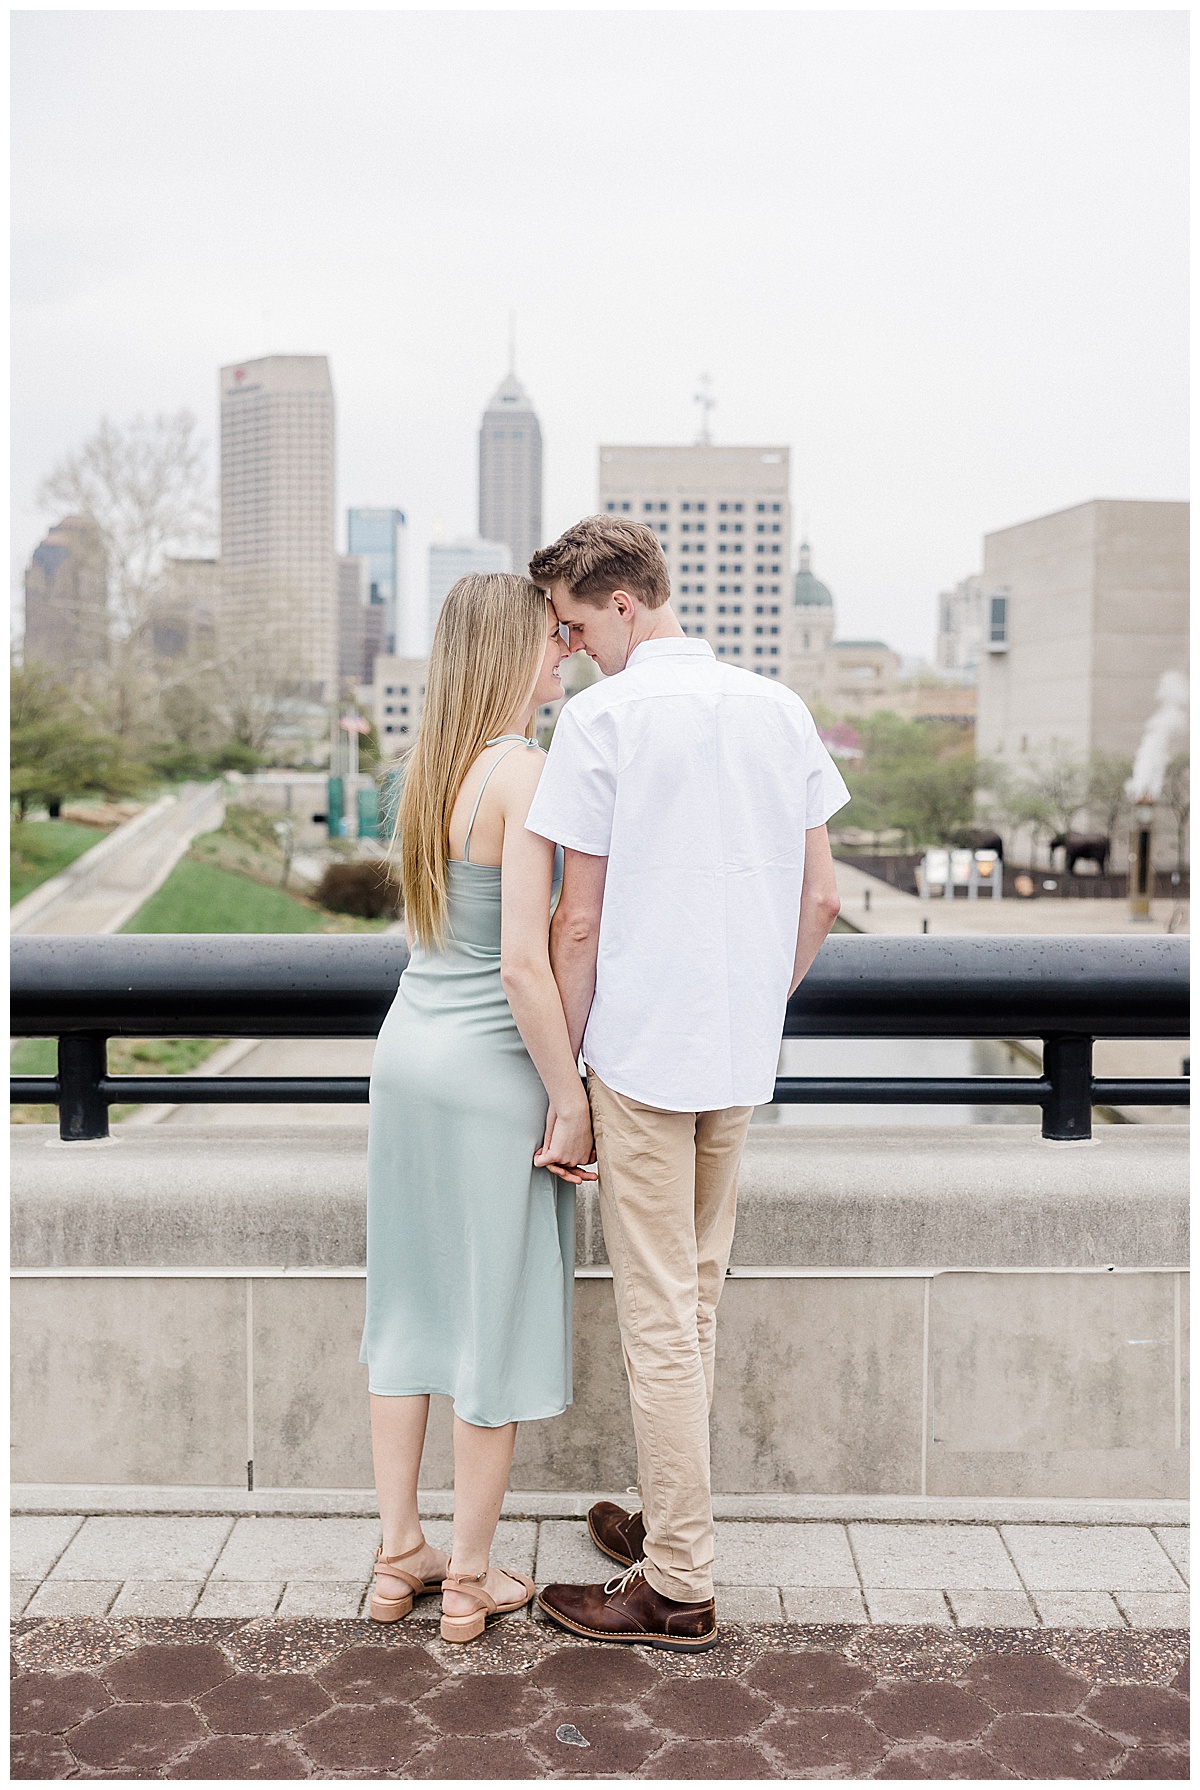 Kaitlin Mendoza Photography captured Downtown Indianapolis Spring engagement photos for Maddie and Austin